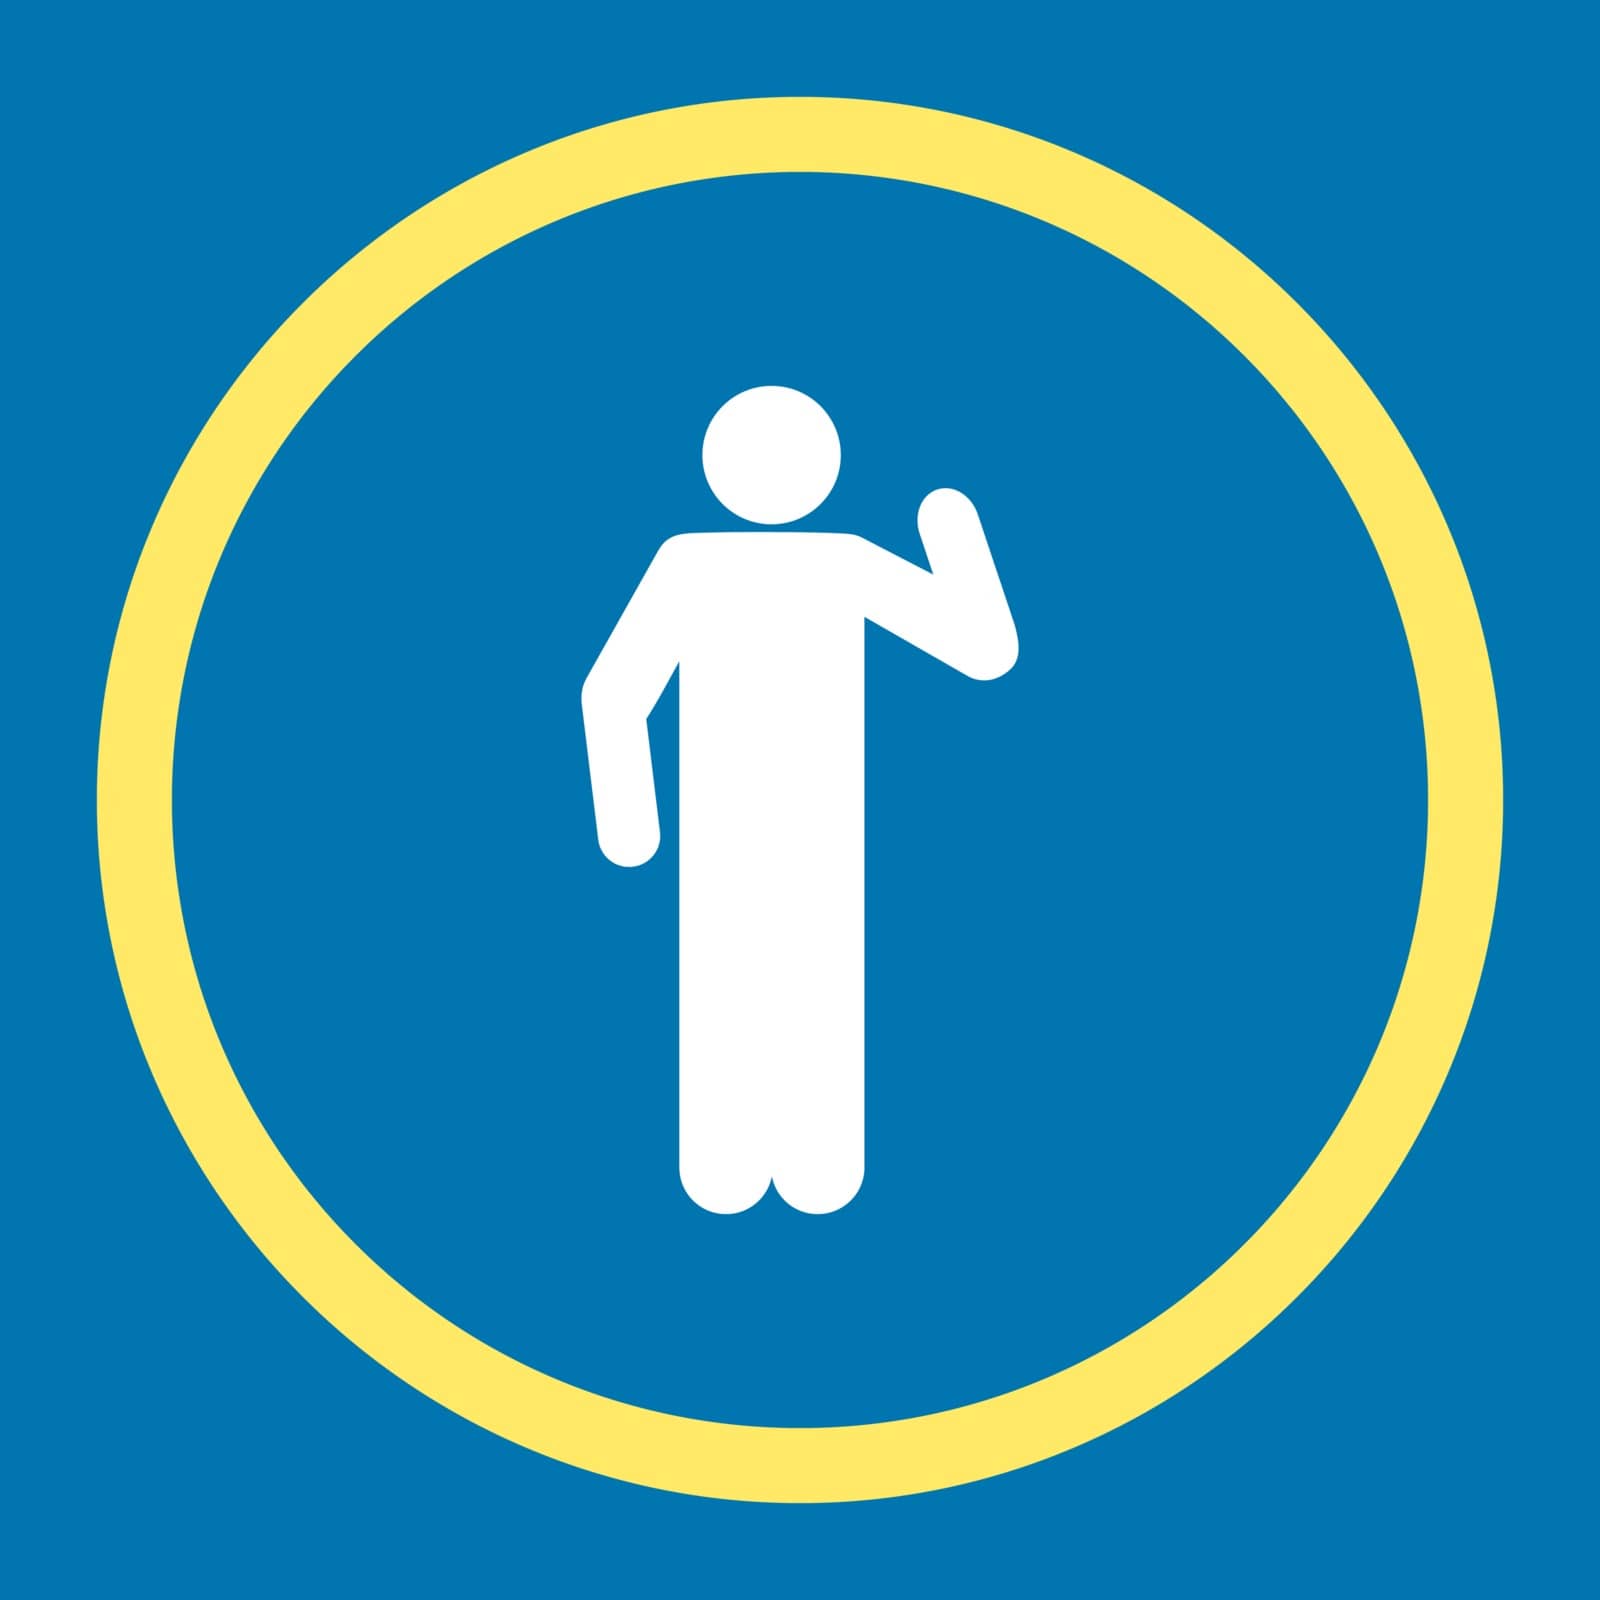 Opinion vector icon. This rounded flat symbol is drawn with yellow and white colors on a blue background.